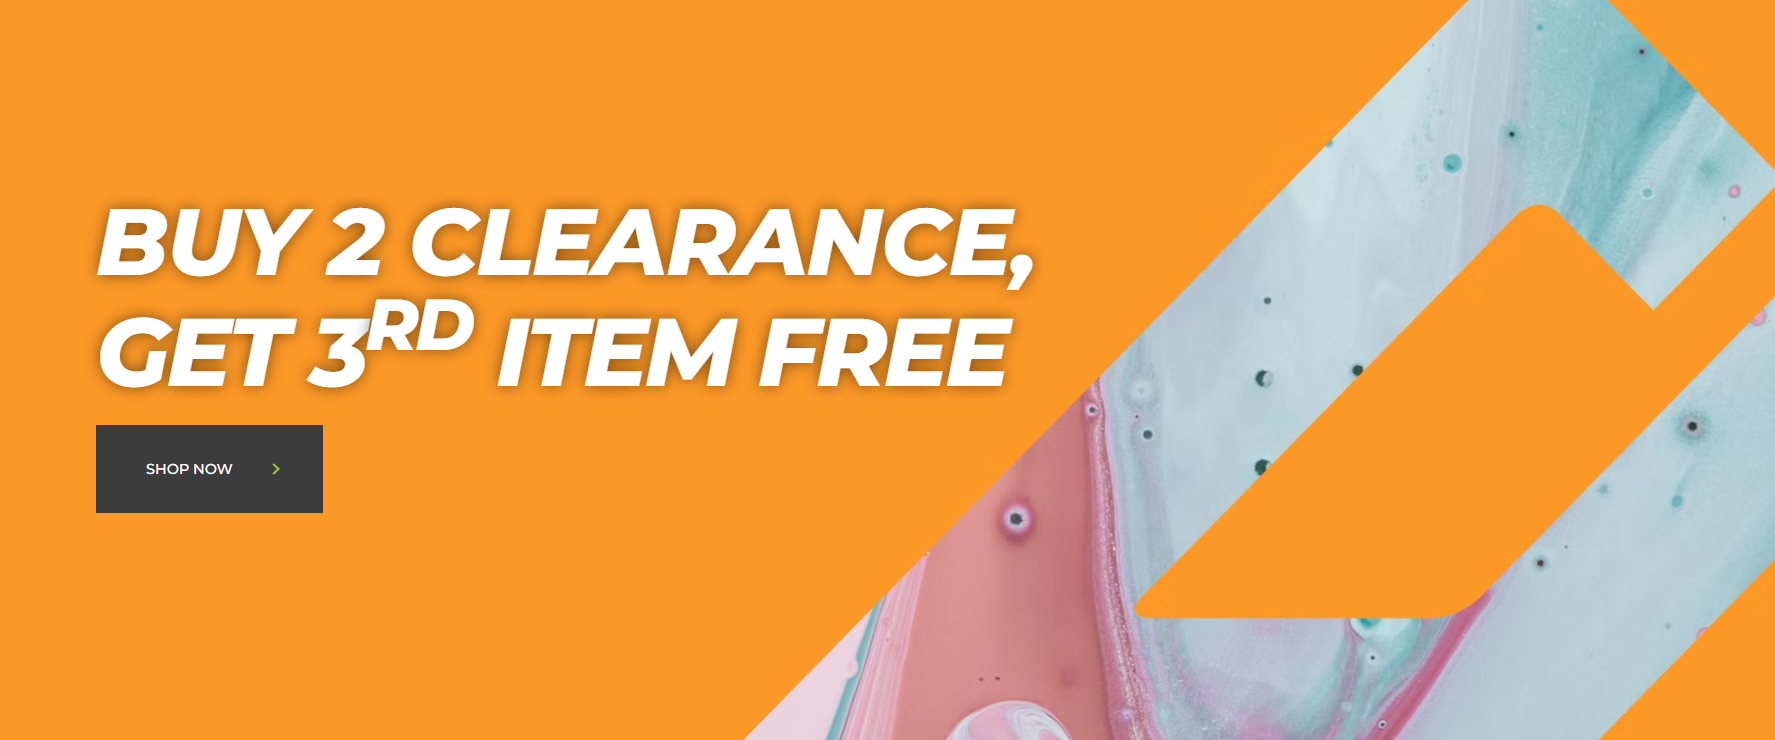 Get 3rd item FREE when you buy 2 clearance items at Kathmandu